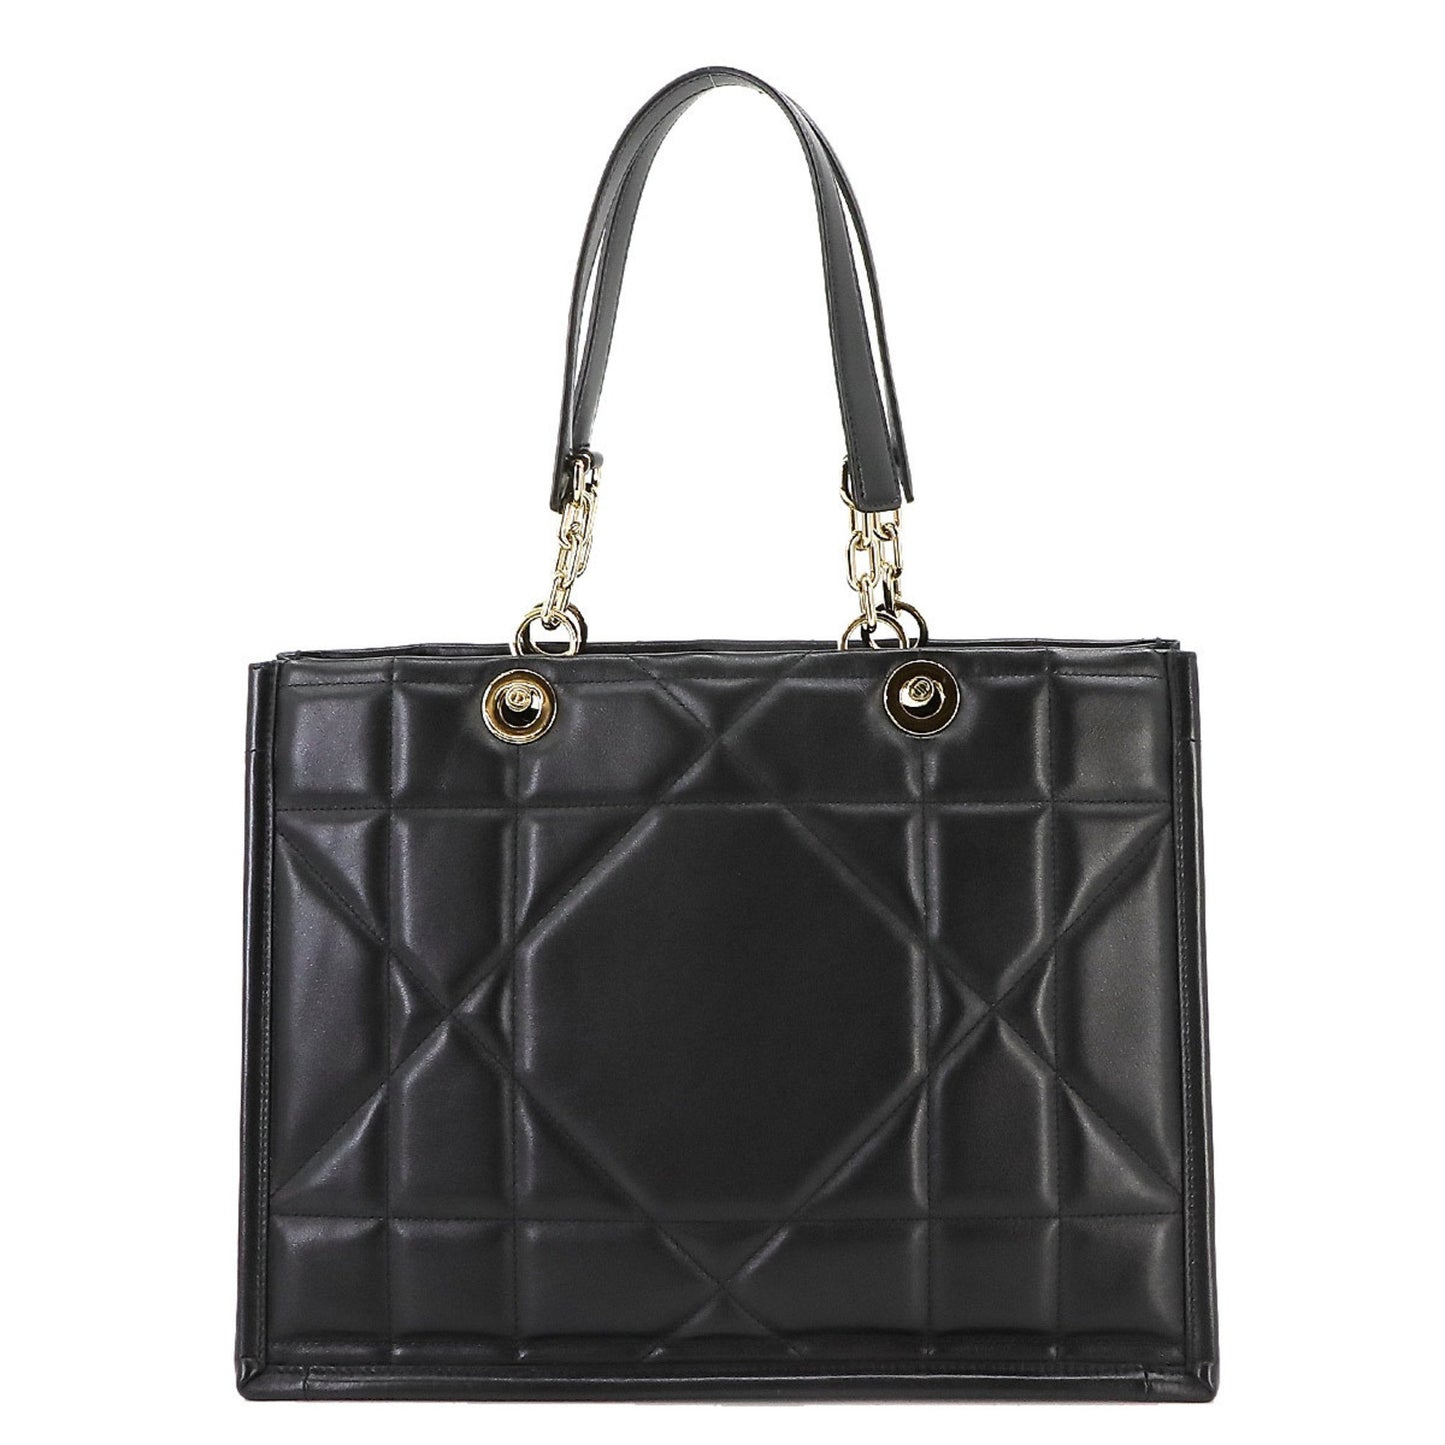 Dior Women's Luxurious Black Leather Tote Bag in Black